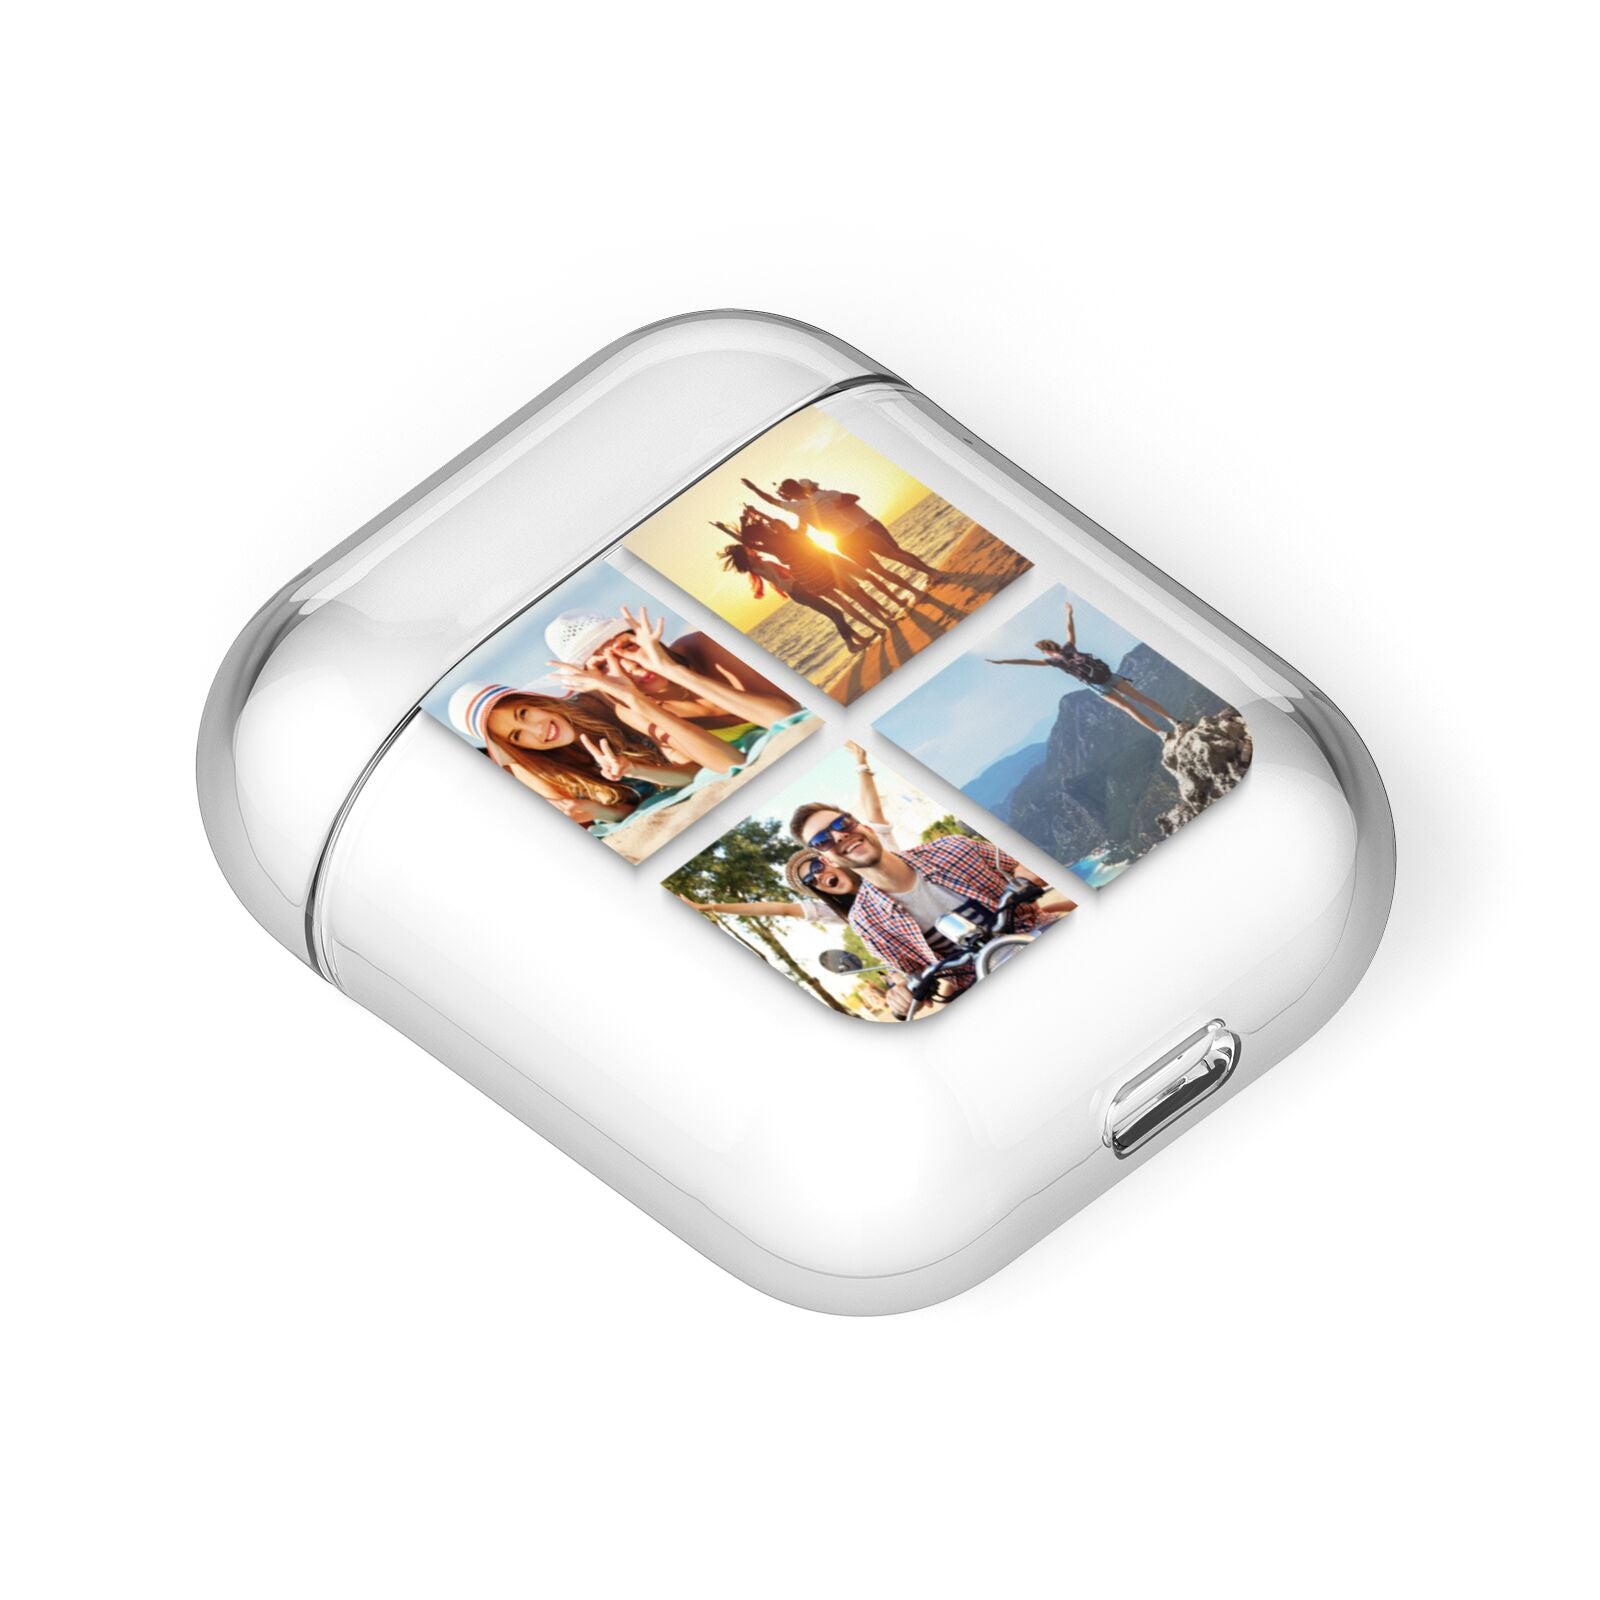 Four Square Photo Tiles AirPods Case Laid Flat